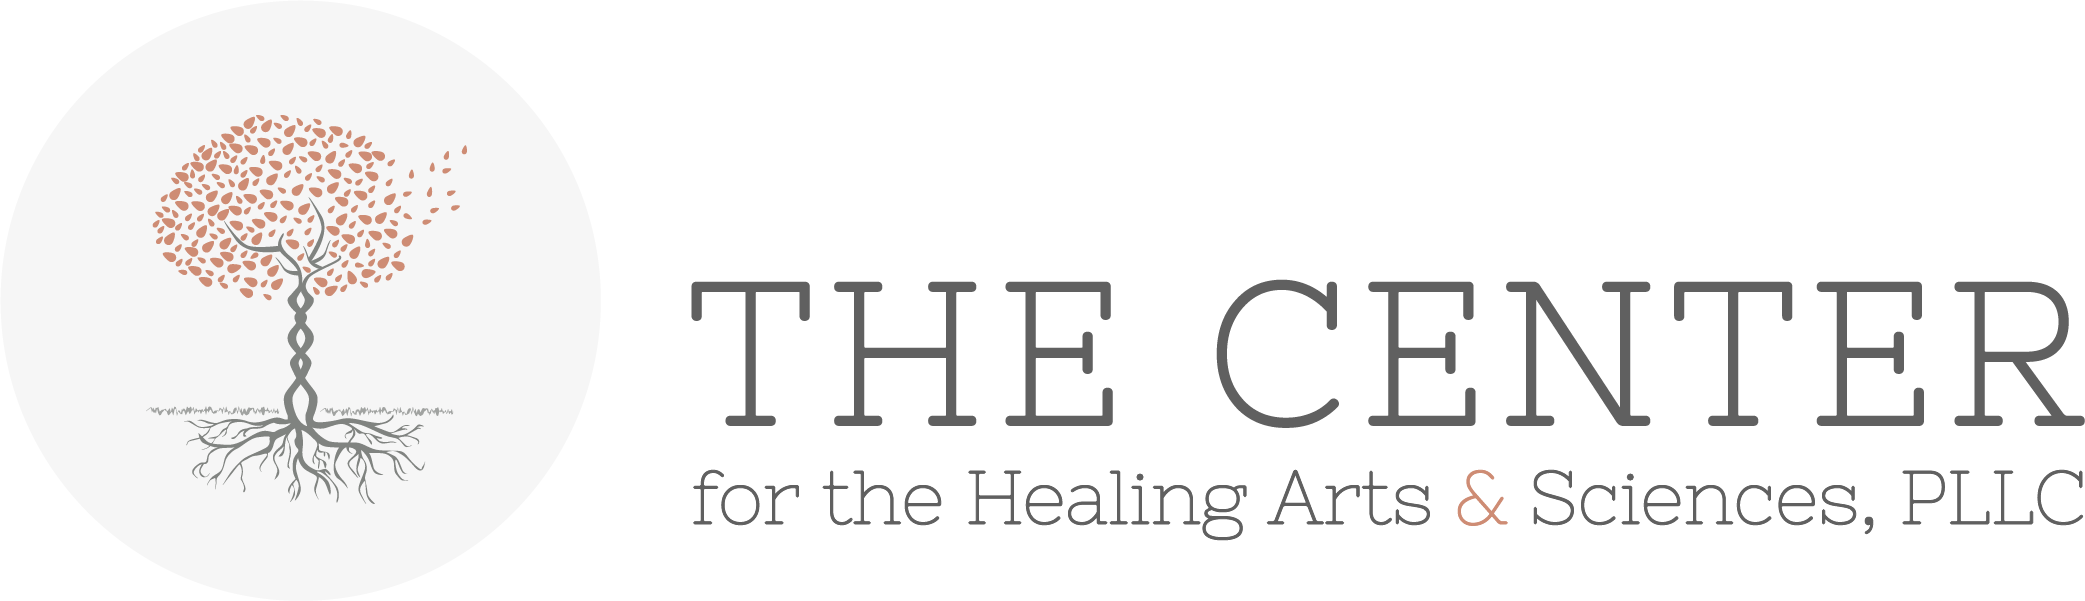 Home Center for Healing Arts and Sciences